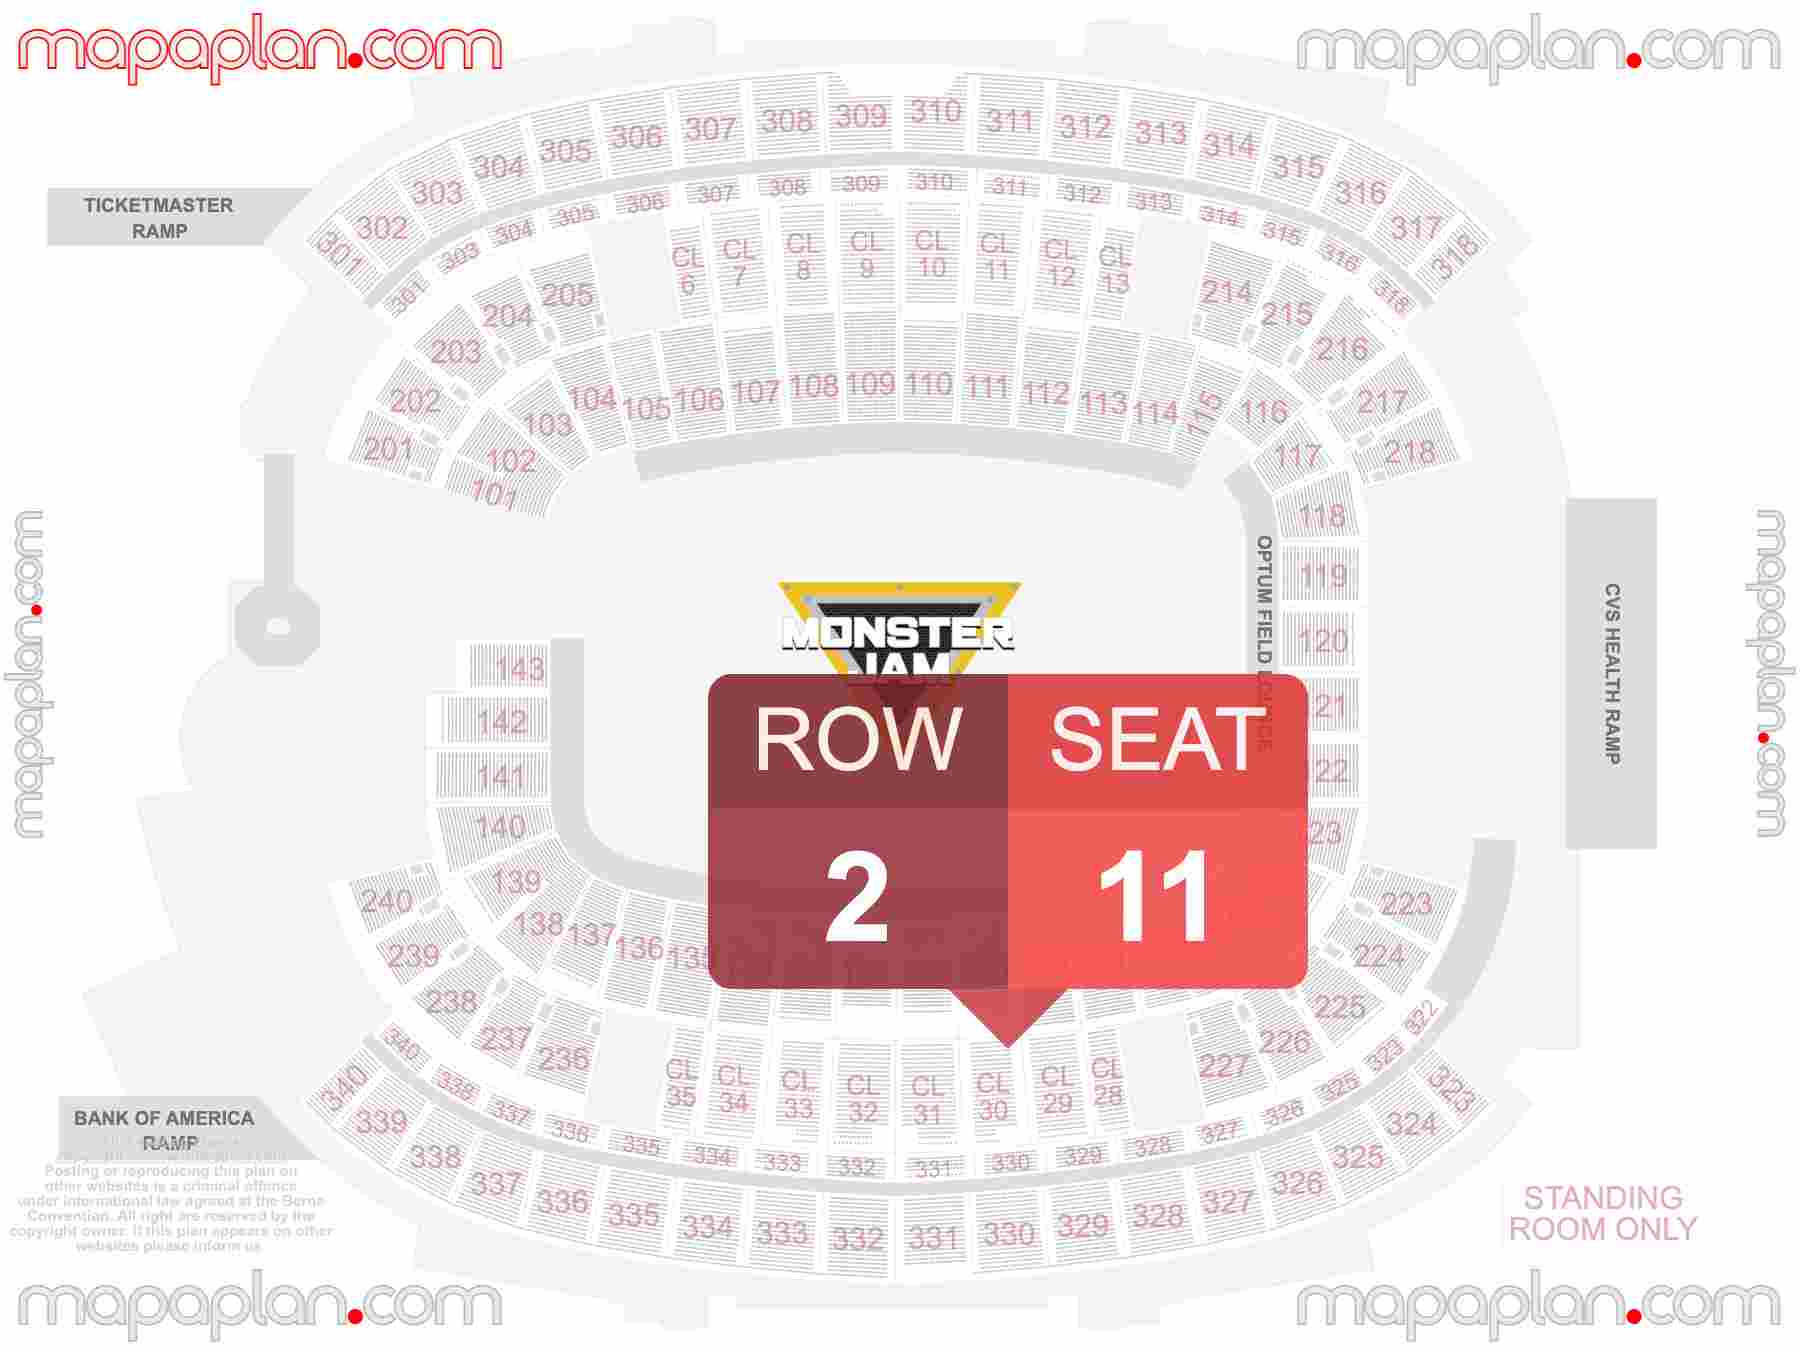 Foxborough Gillette Stadium seating chart Monster Jam trucks seating plan - Interactive map to find best seat and row numbers